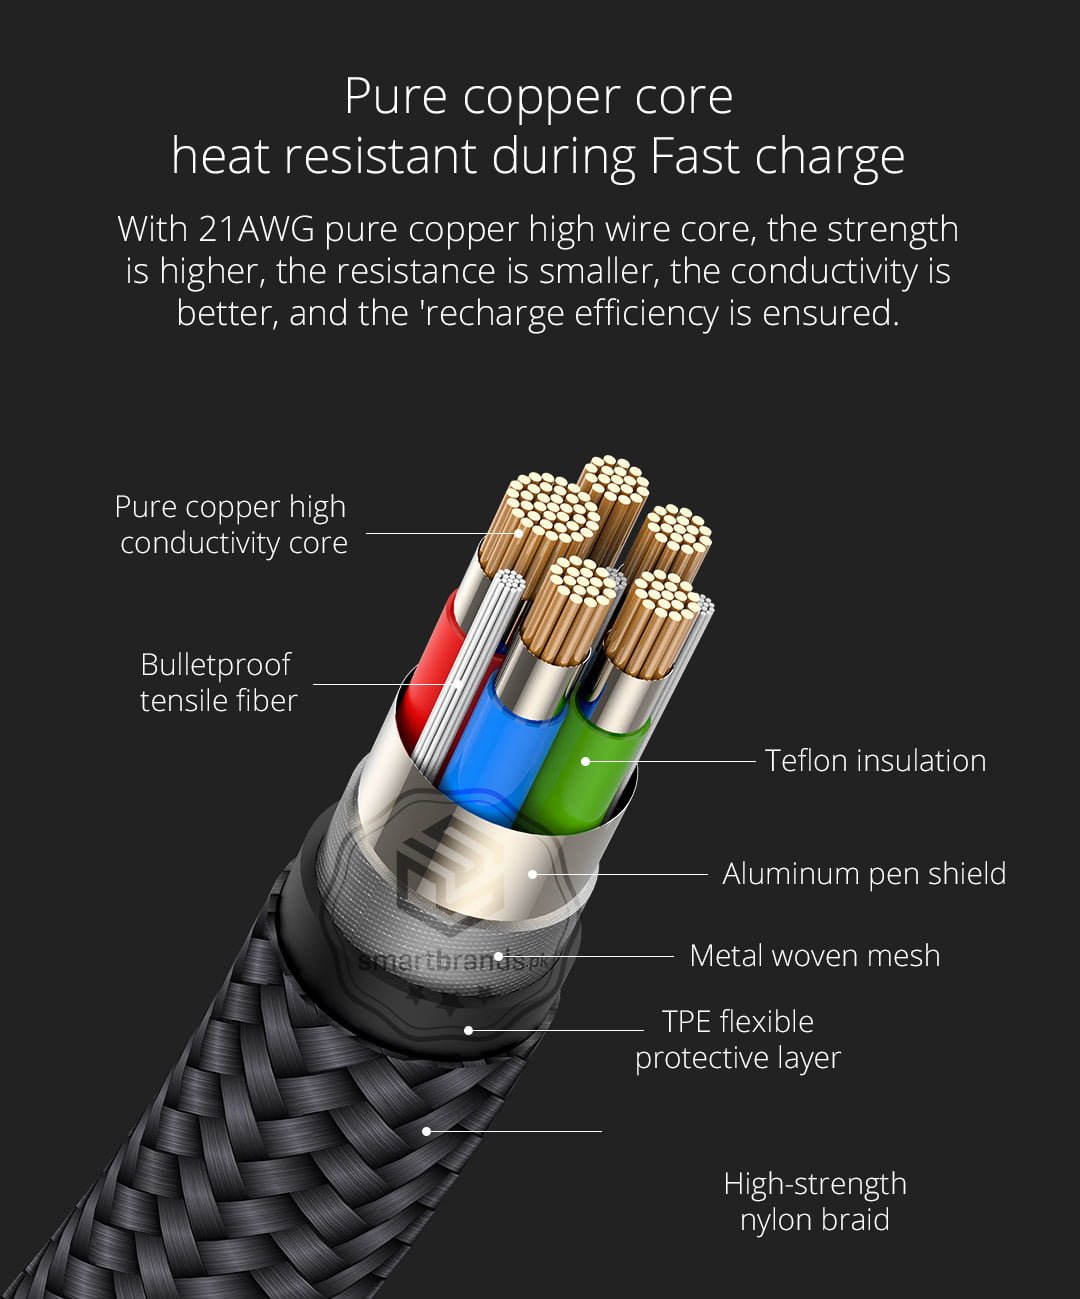 Pure copper core heat resistant during Fast charge. With 21AWG pure copper high wire core, the strength is higher, the resistance is smaller, the conductivity is better, and the 'recharge efficiency is ensured.